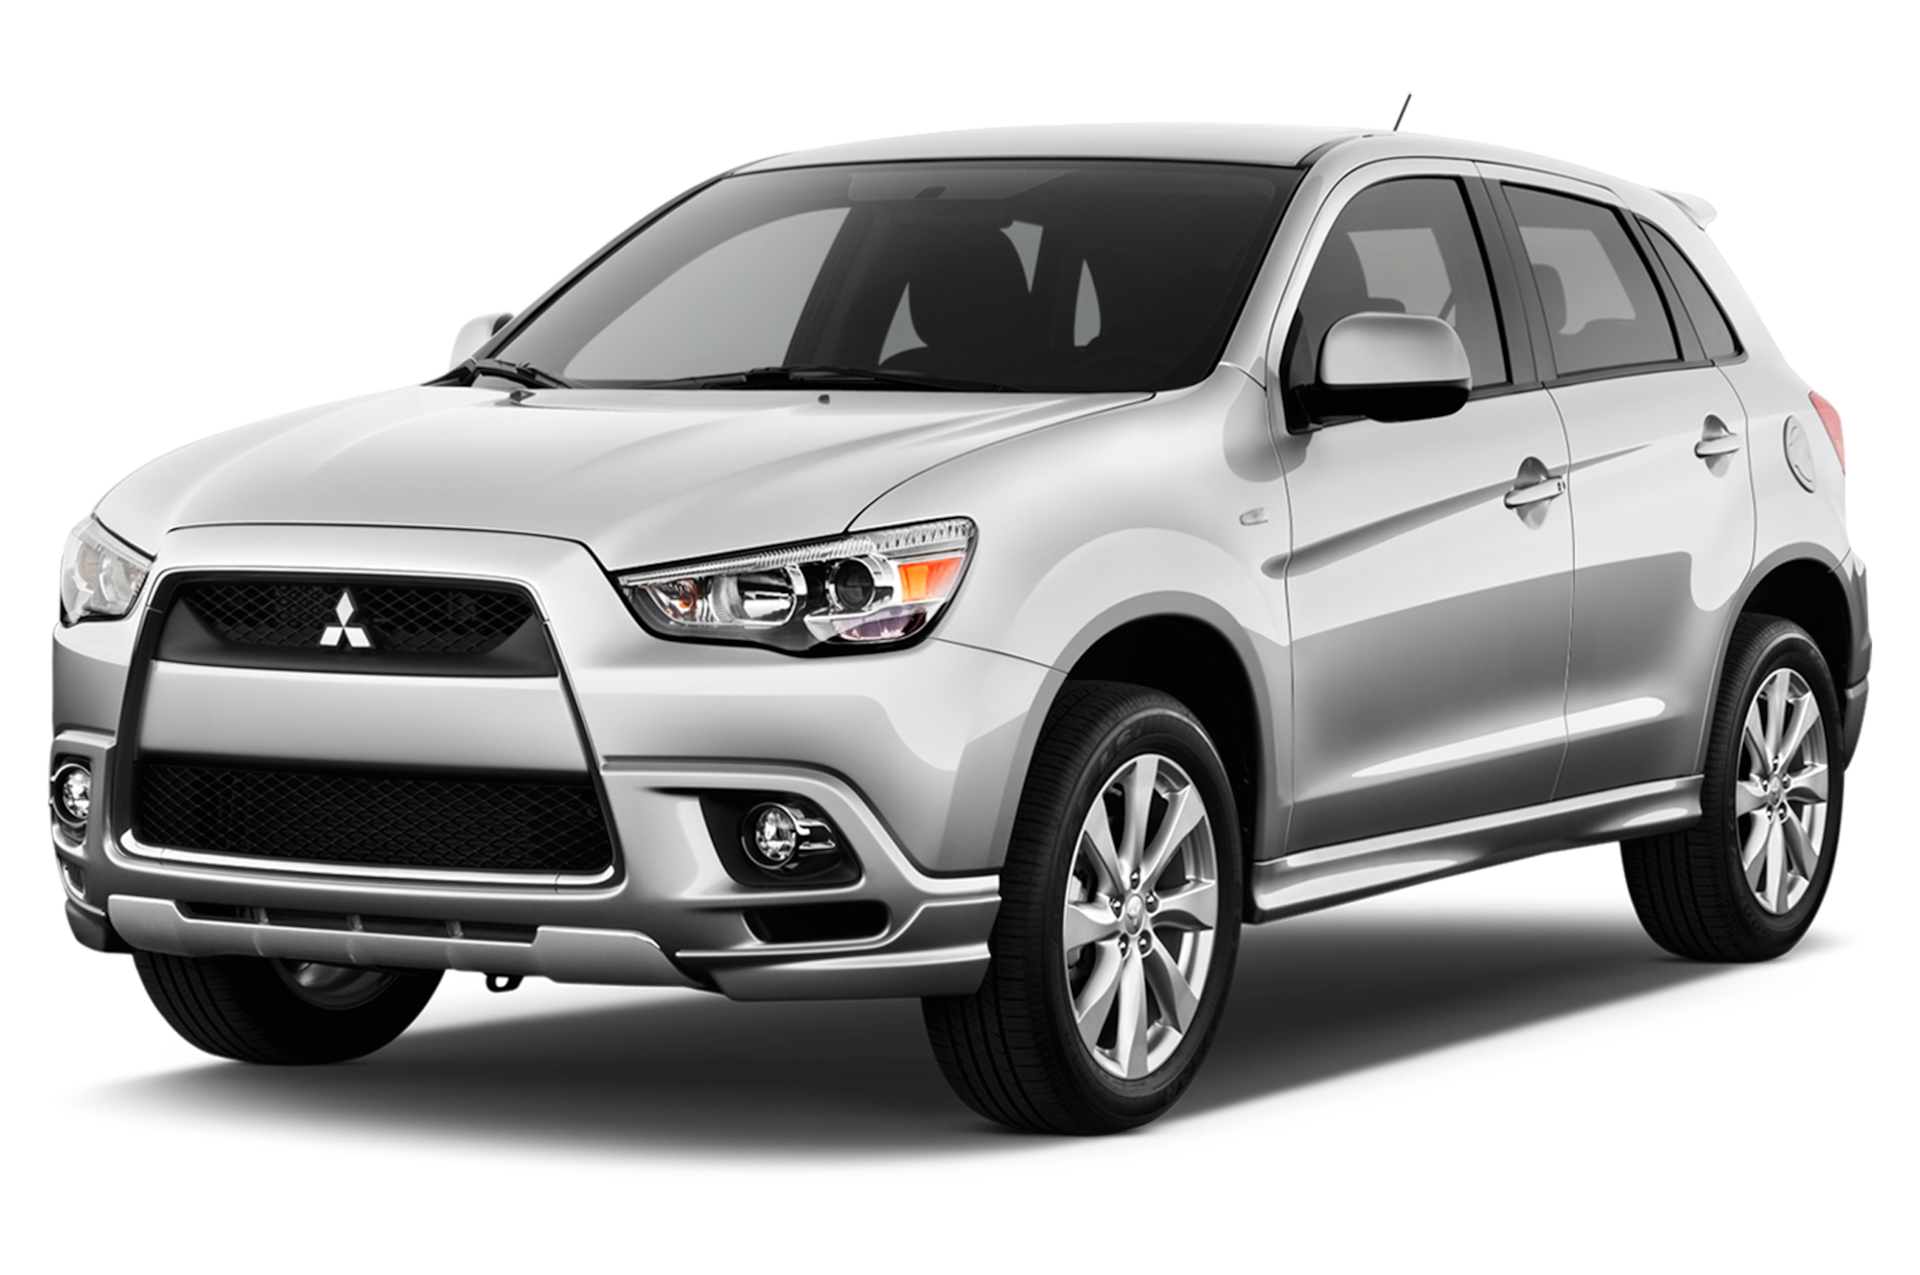 2012 Mitsubishi Outlander Sport Prices, Reviews, and Photos - MotorTrend